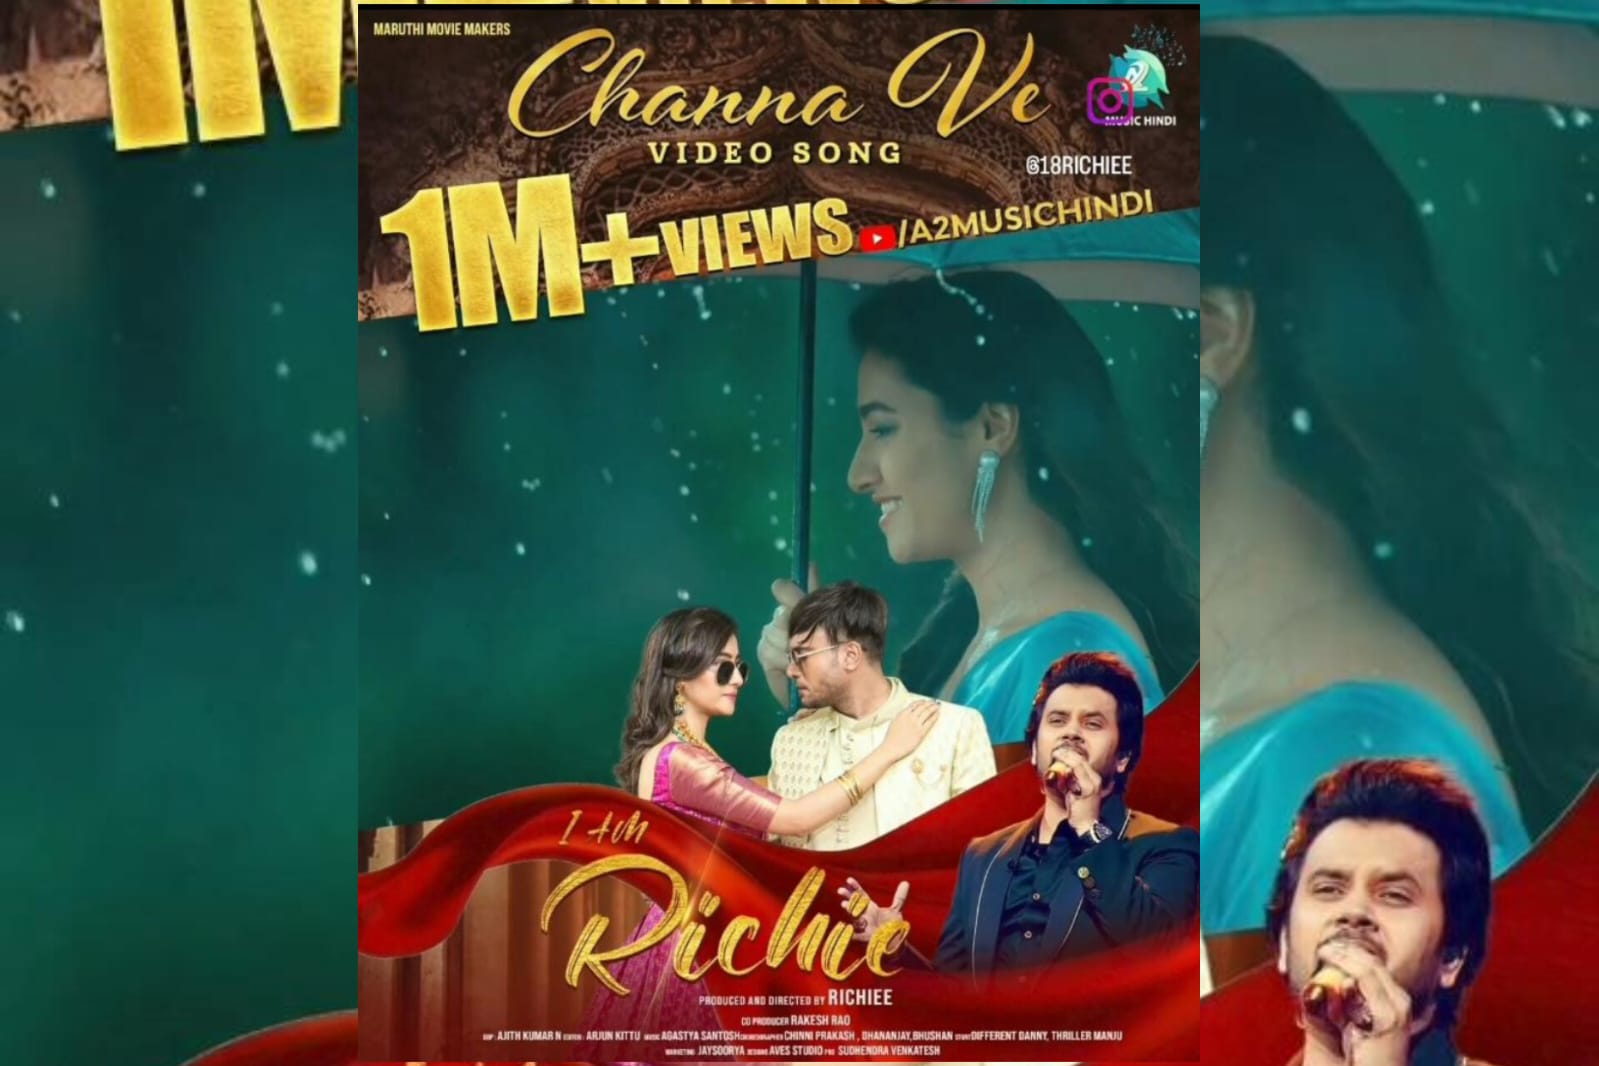 *Channa Ve Song sung by Javed Ali from Richie film is an instant chartbuster*